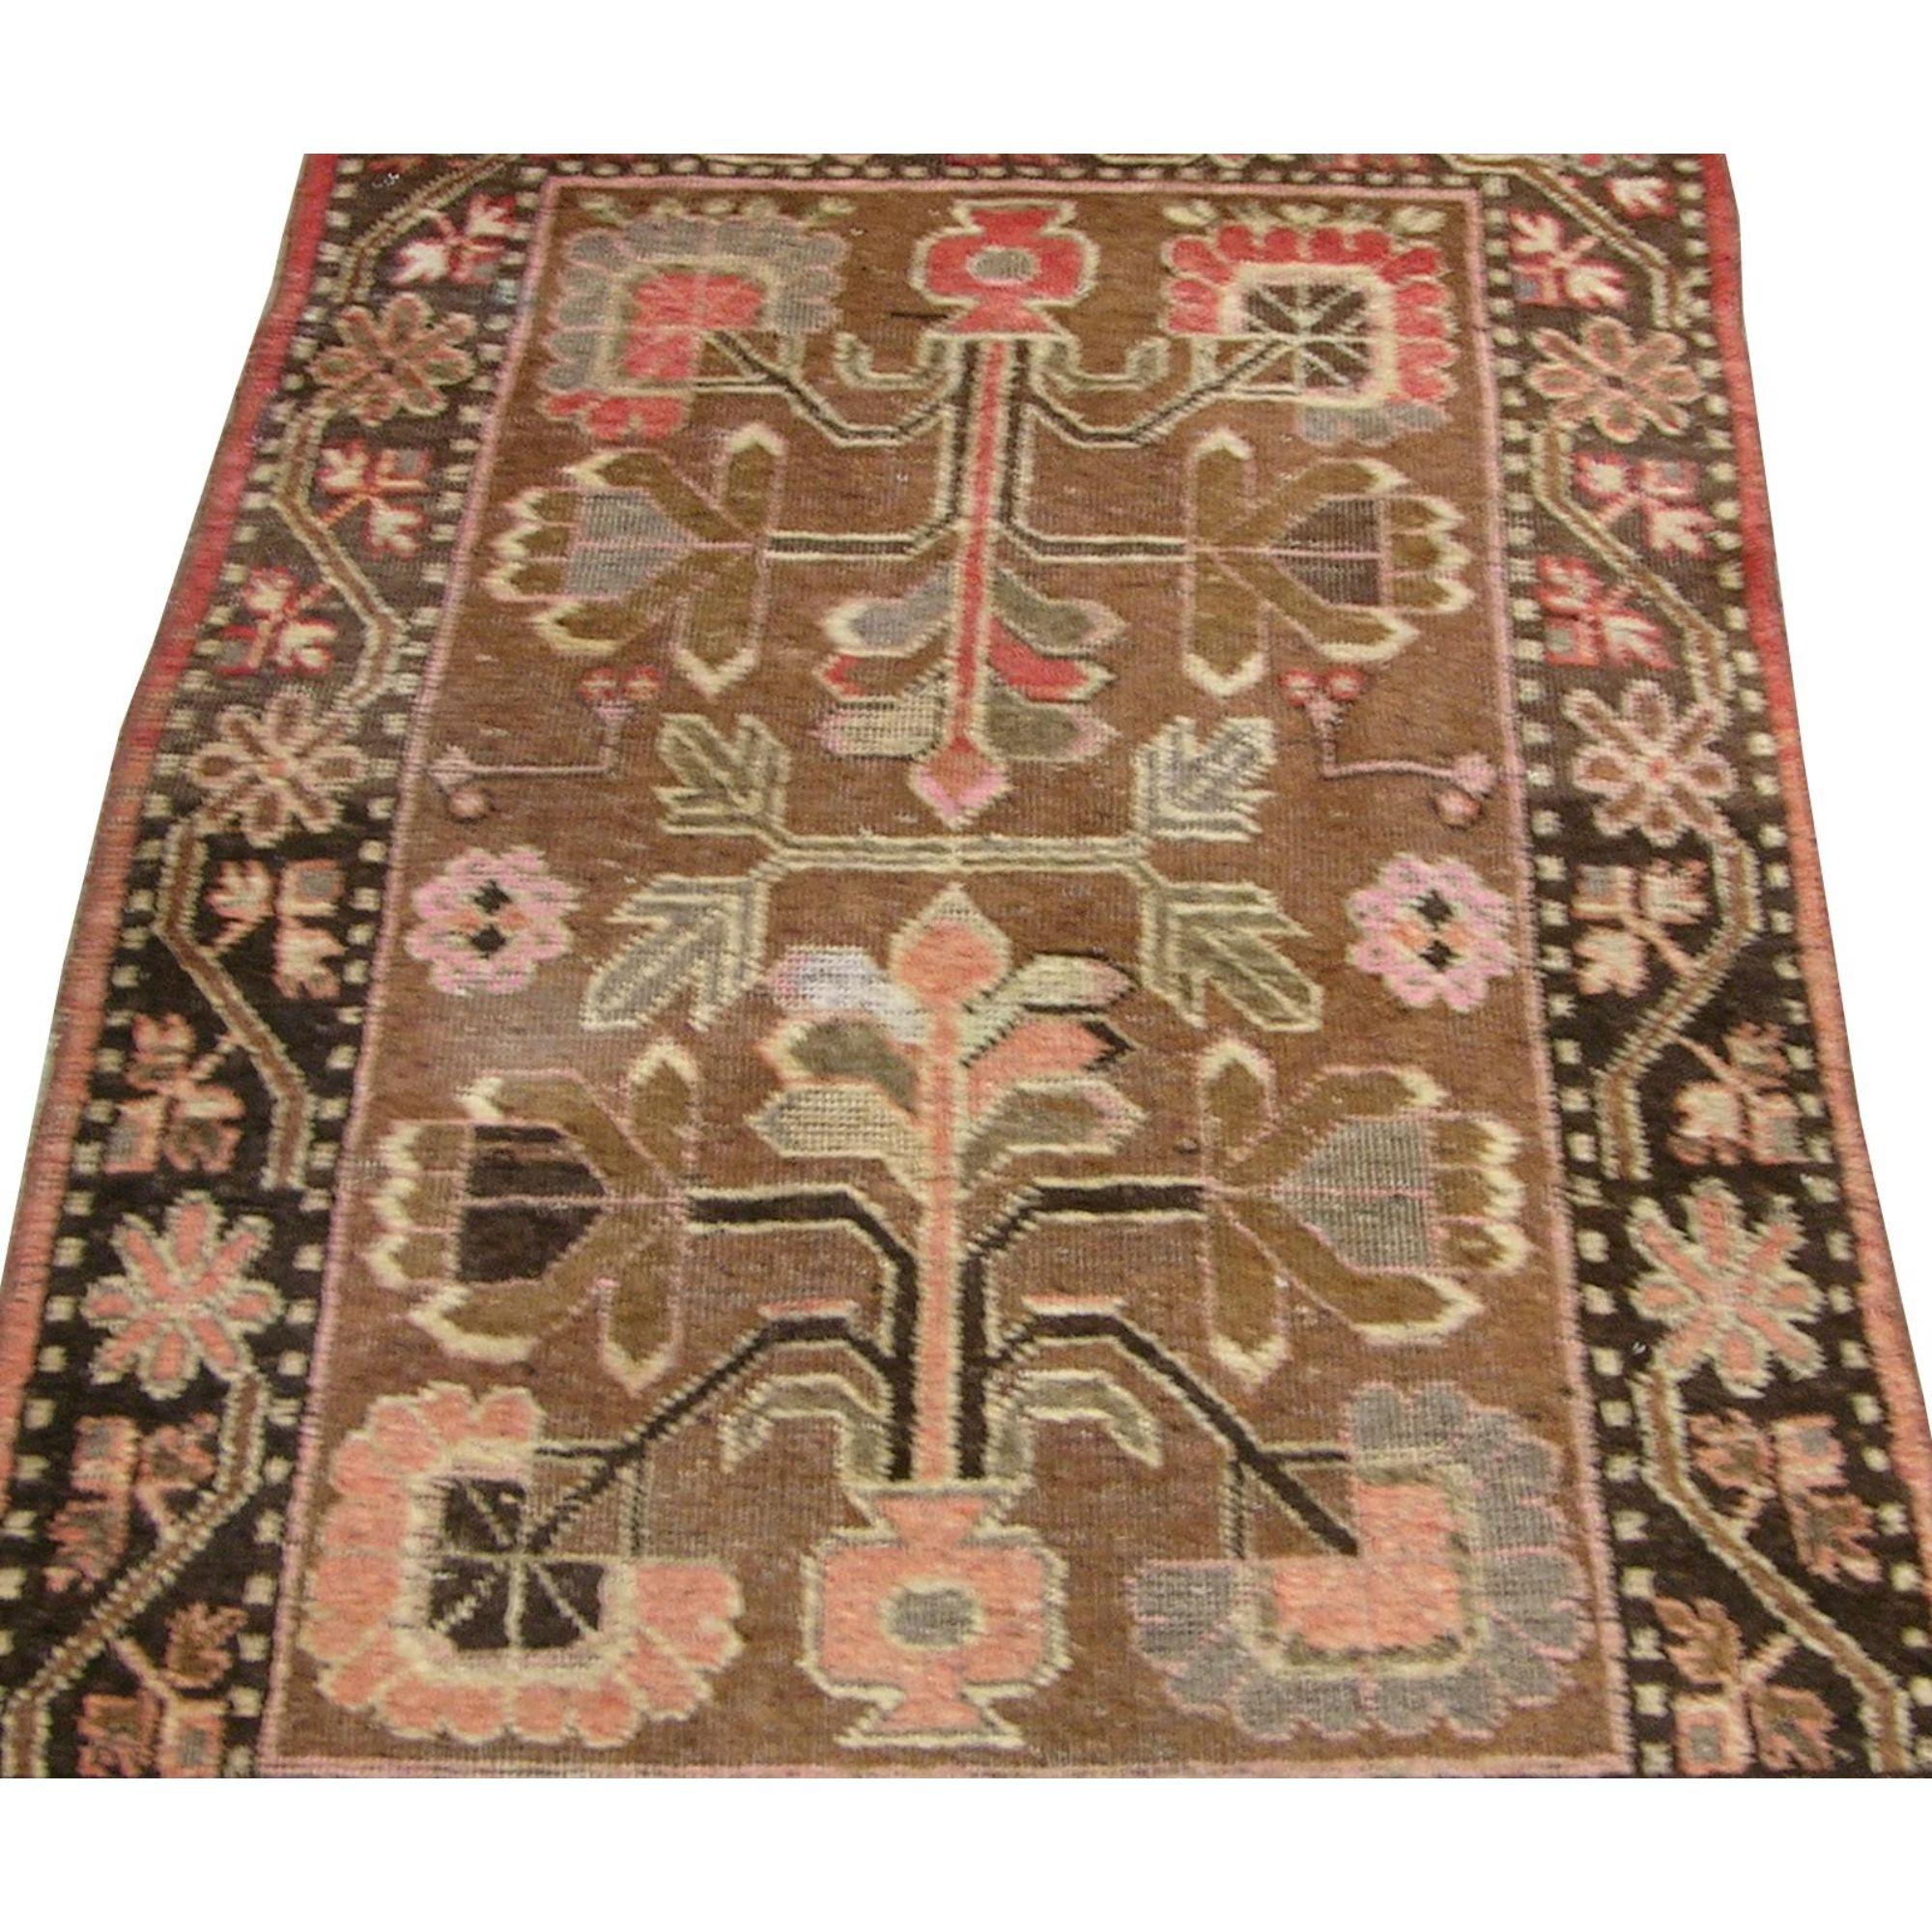 Other Early-19th Century Authentic Uzbek Samarkand Rug 4'8'' X 2'9'' For Sale